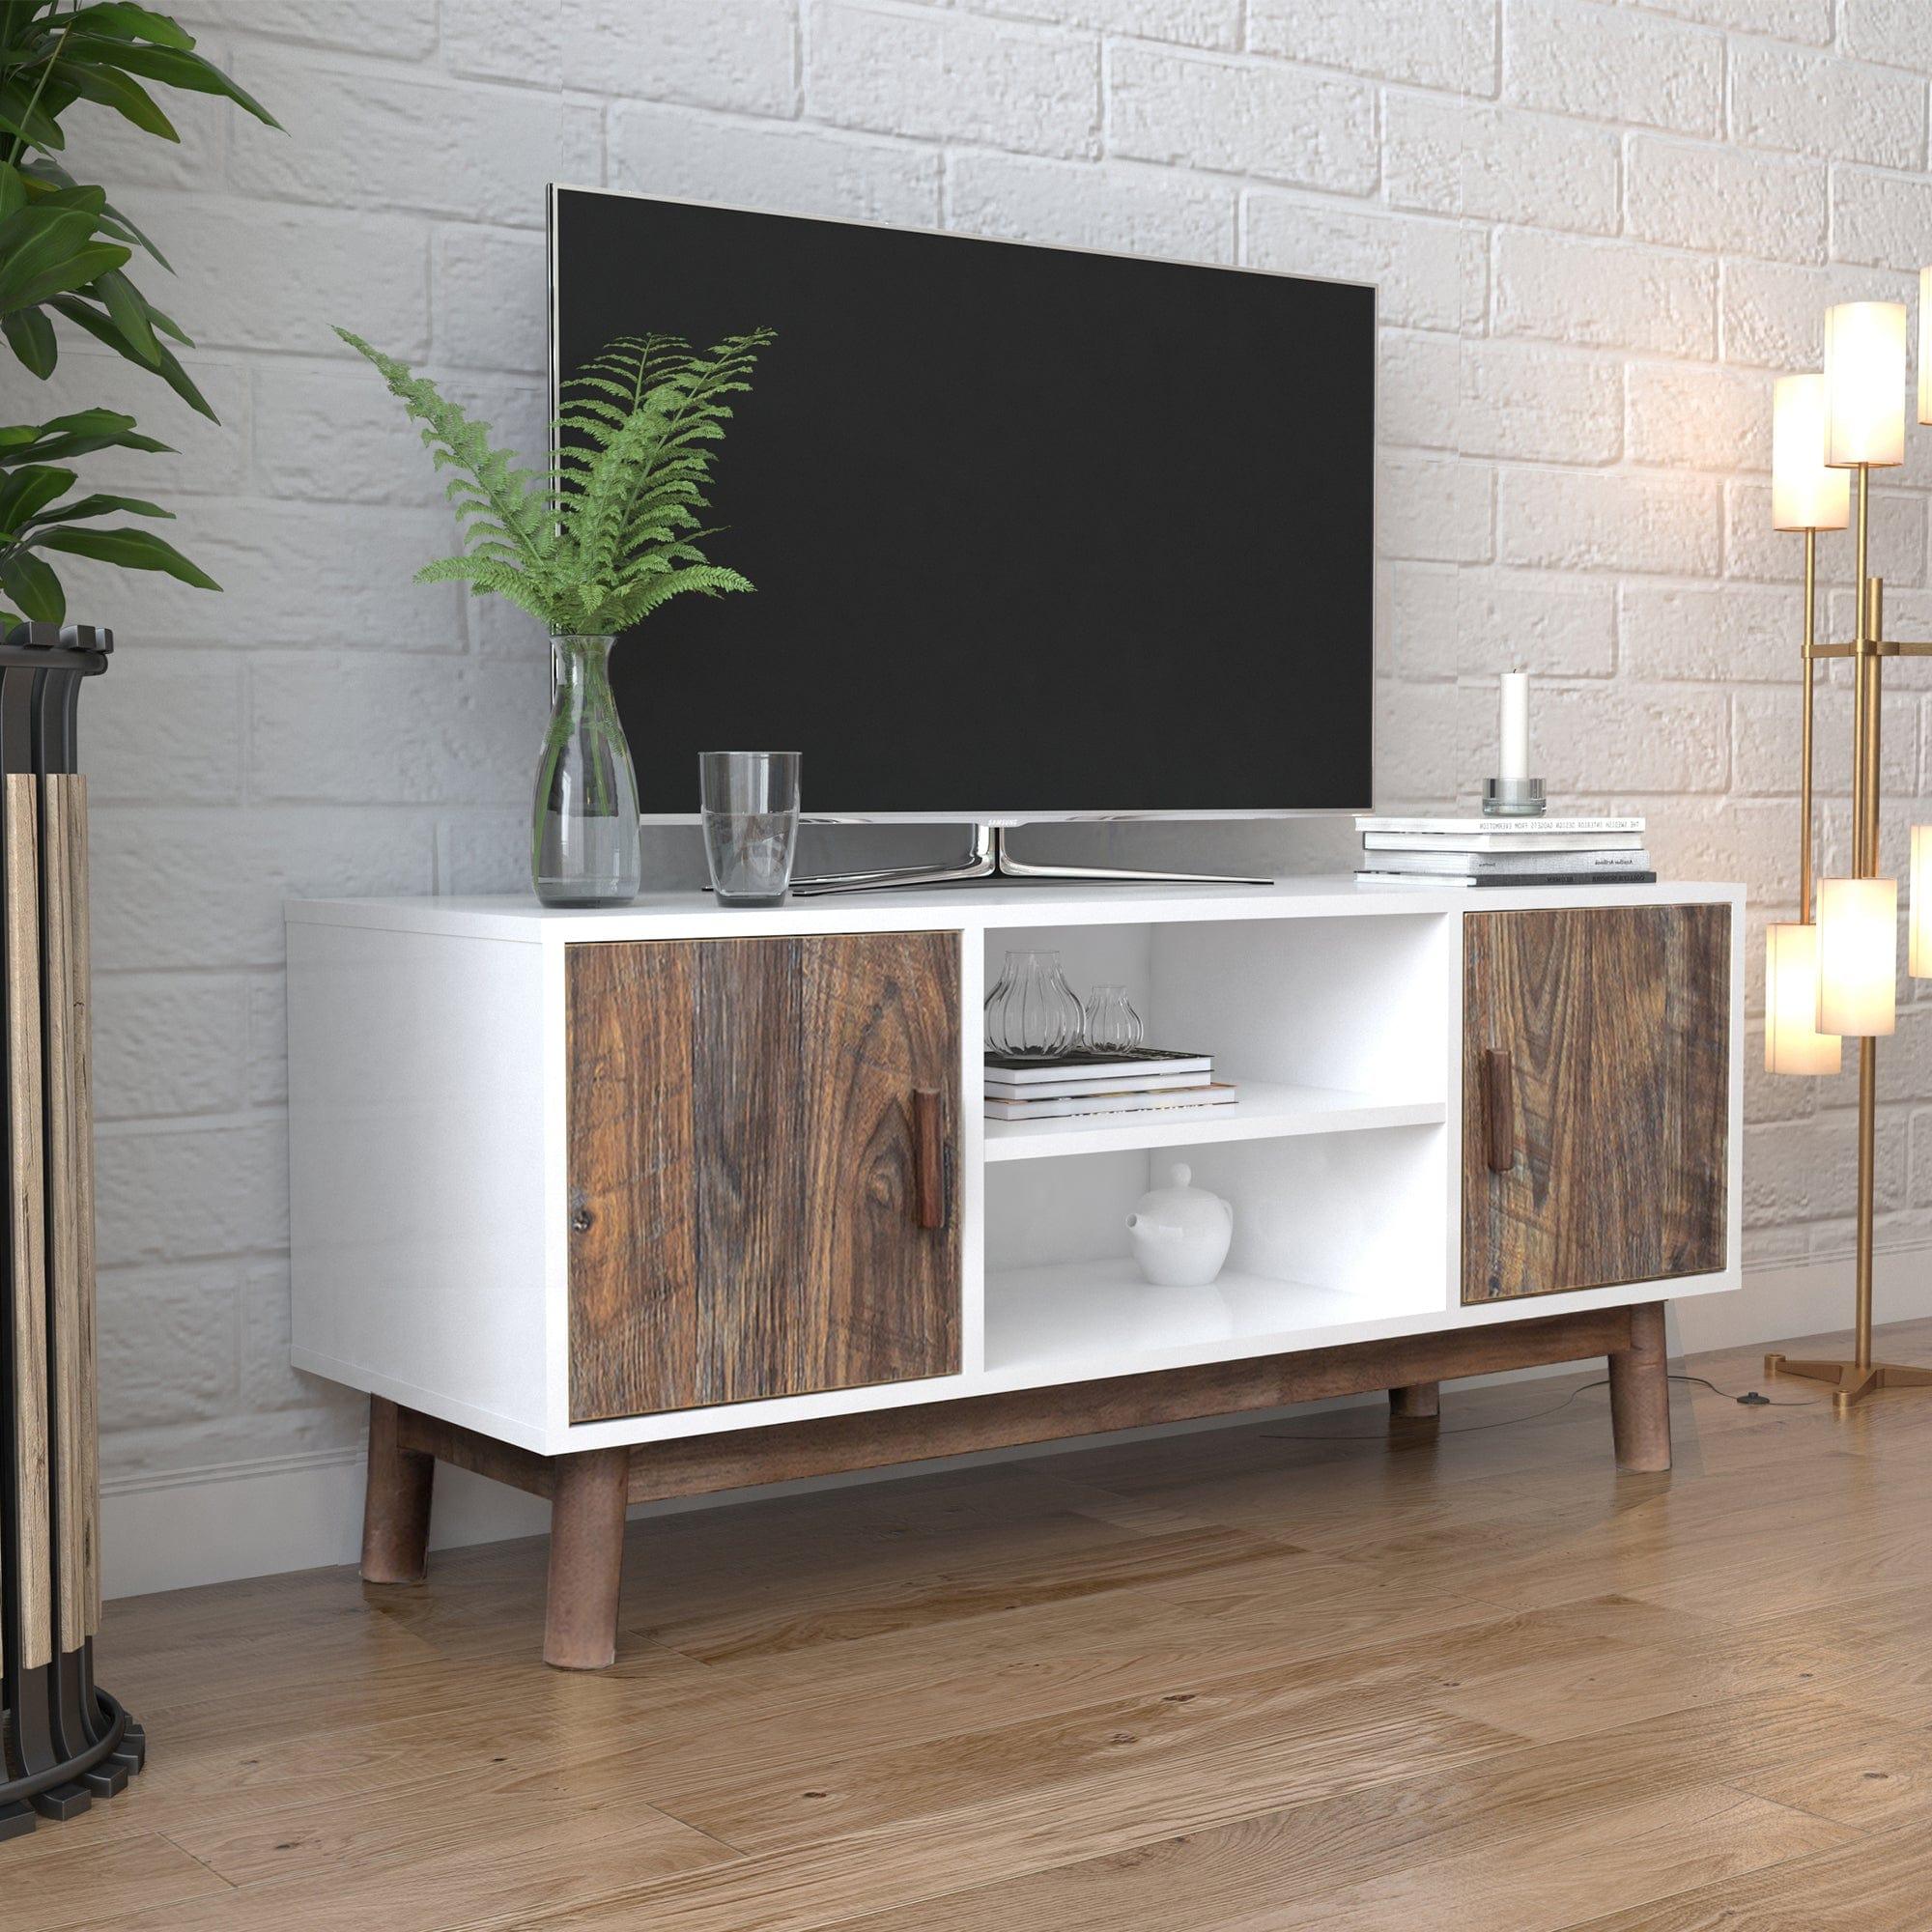 Shop TV Stand Mid-Century Wood Modern Entertainment Center Adjustable Storage Cabinet TV Console for Living Room , White & Espresso Mademoiselle Home Decor